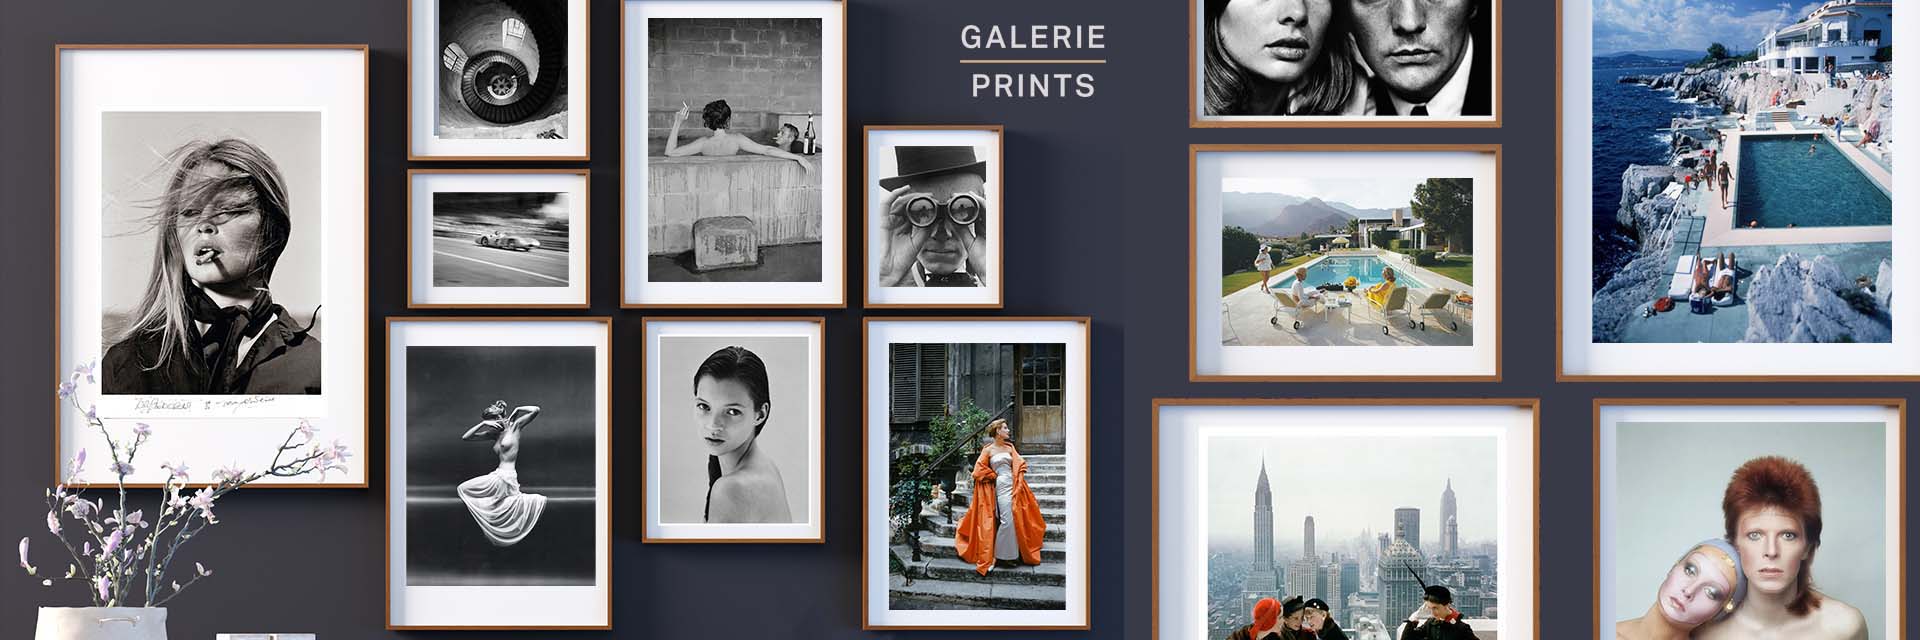 A selection of beautiful photography prints that includes Brigitte Bardot with cigar by Terry O'Neill, Steve McQueen in a hot tub, Kaye Moss at 16, Mark Shaw Archive images, Poolside Gossip by Slim Aarons. Young Velvets in New York City by Norman Parkinson and David Bowie with Twiggy by Justin De Villeneuve for his Pin Ups album as well as the Hotel Du Cap Eden Roc by Slim Aarons.